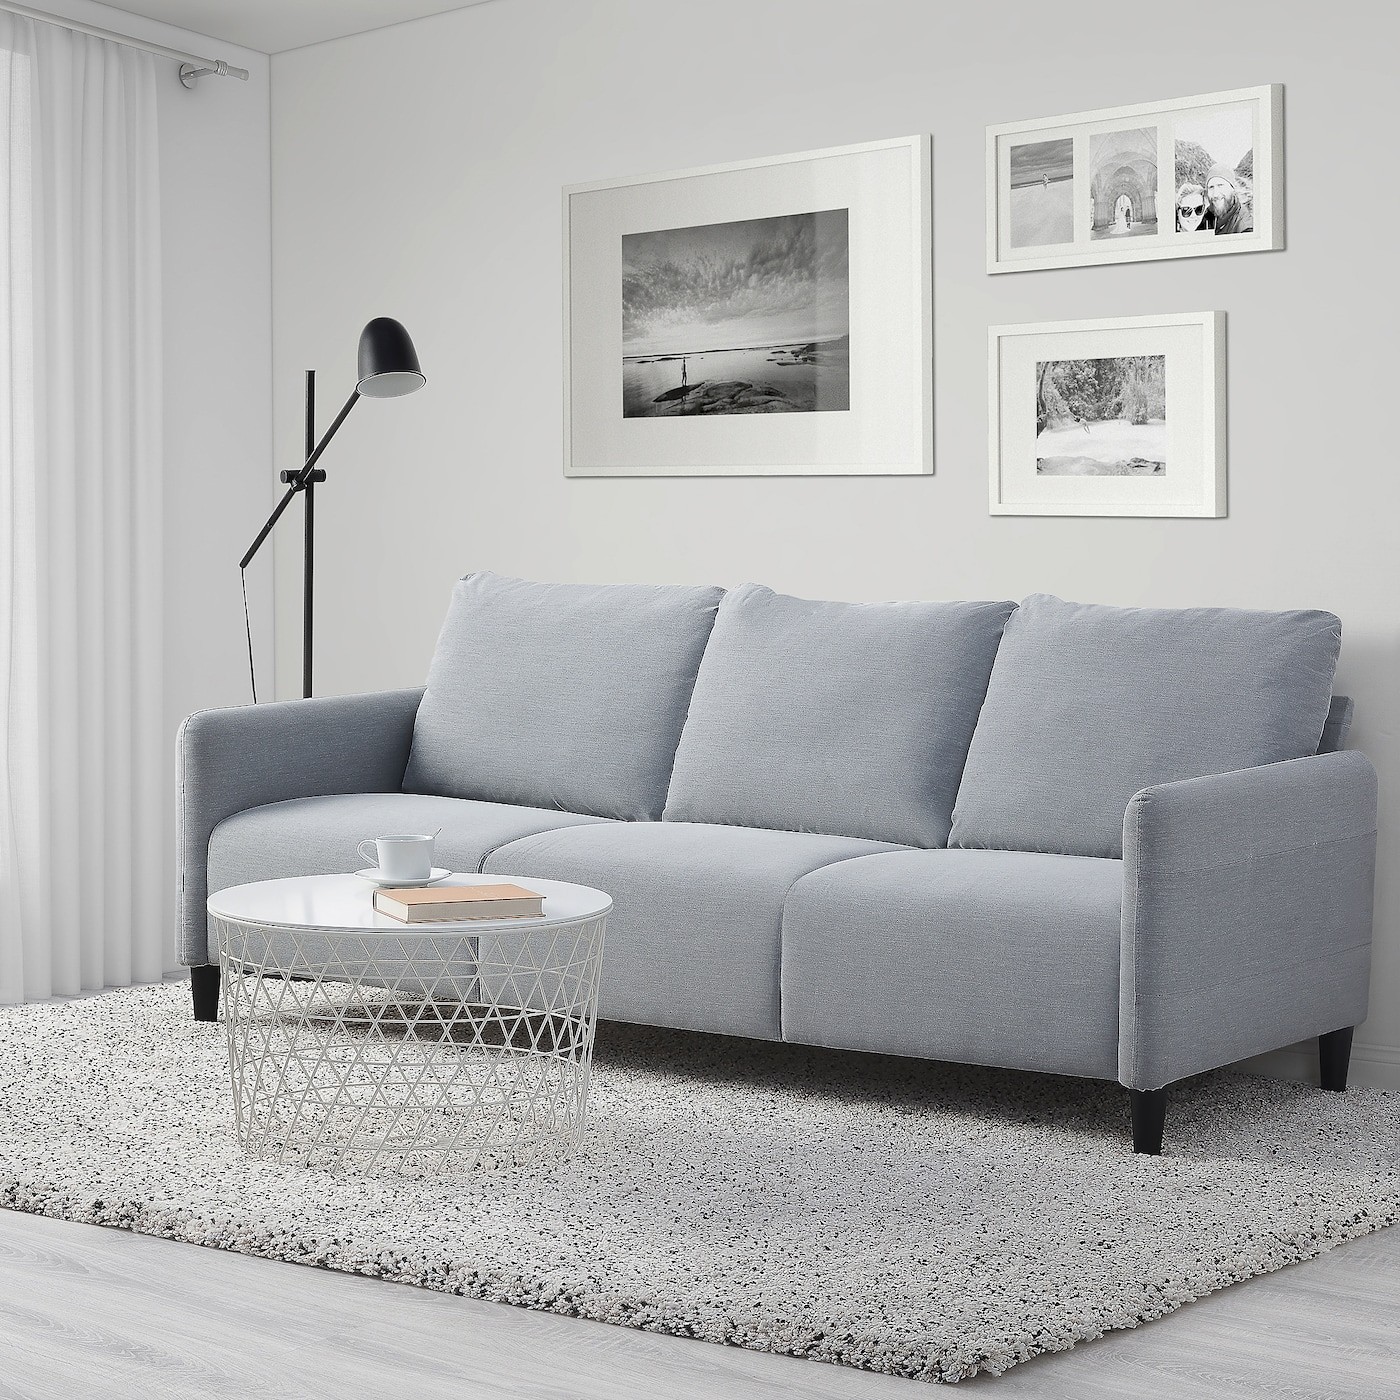 ANGERSBY 3-seat sofa